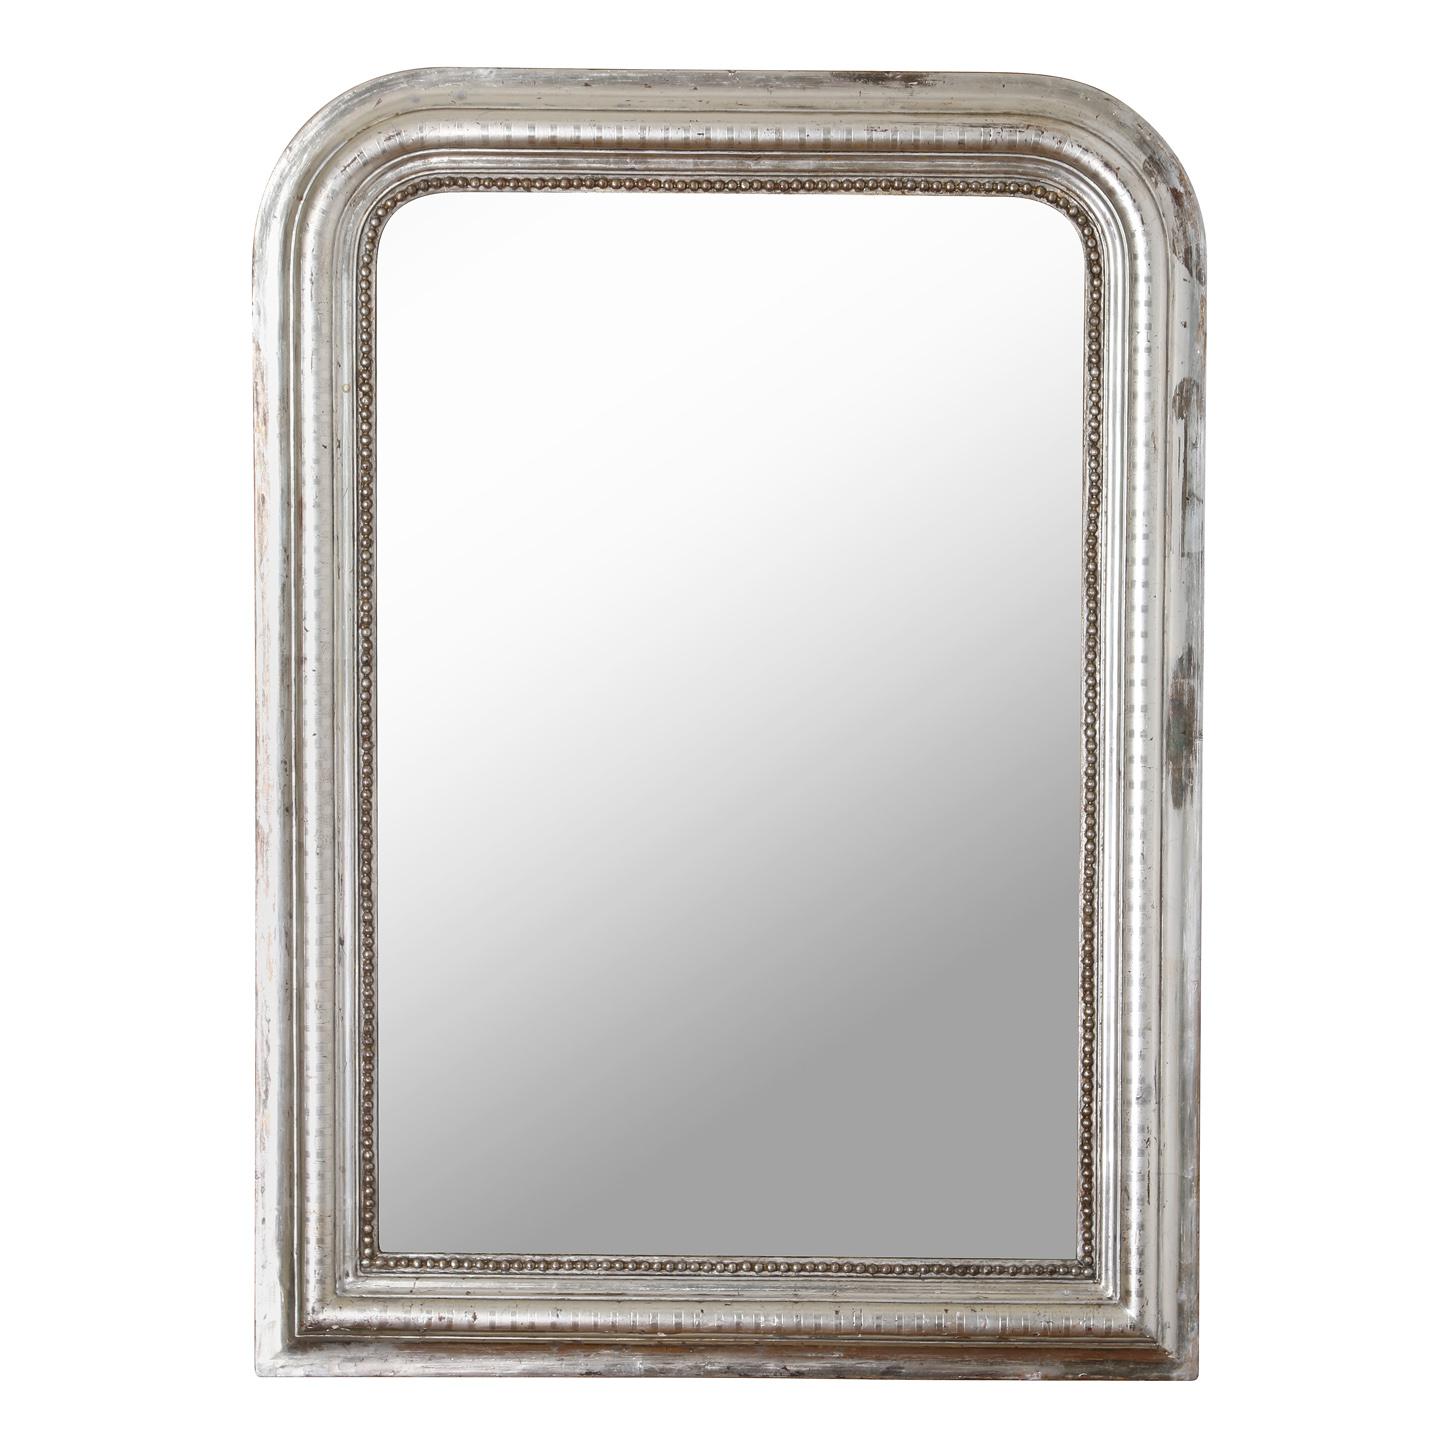 A Louis-Philippe mirror is often the perfect finishing touch in a room. This silvered wood mirror has a straight bottom with curved corners at the top, a form characteristic of the Louis Philippe style.  The frame its decorated with a geometric